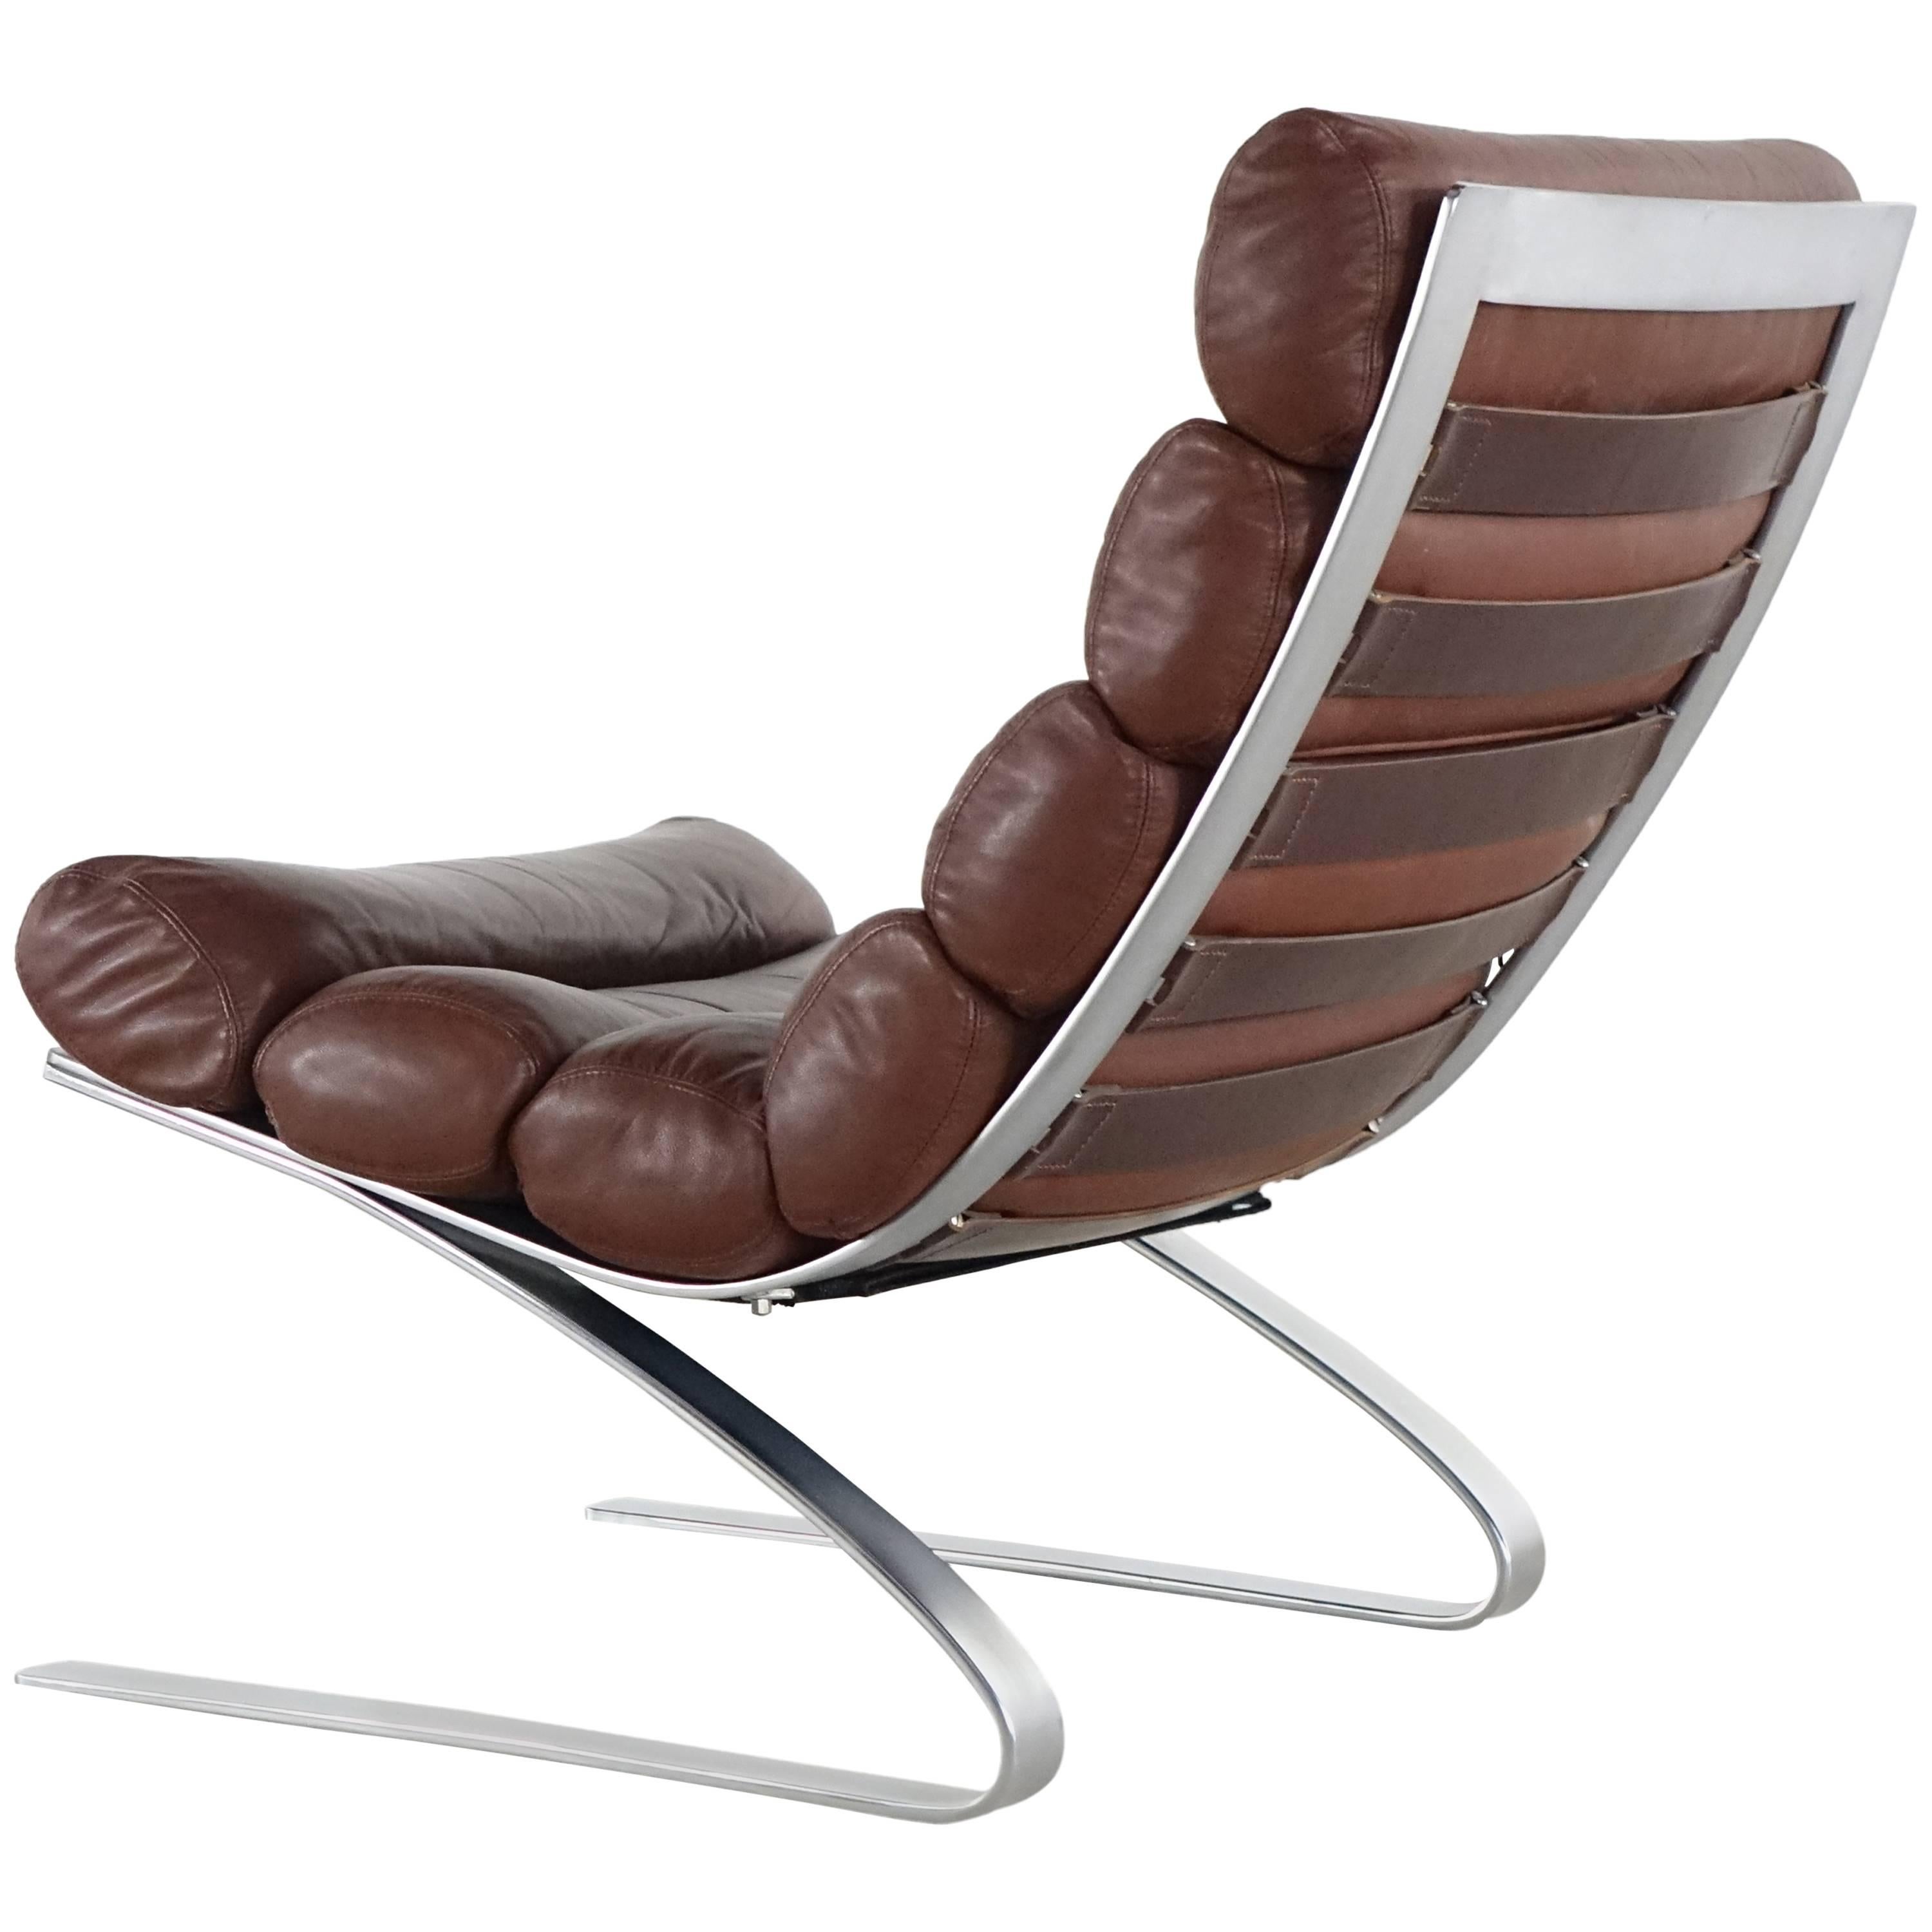 COR Sinus Easychair Lounge Chair, 1976 by Reinhold Adolf in Chocolate Leather